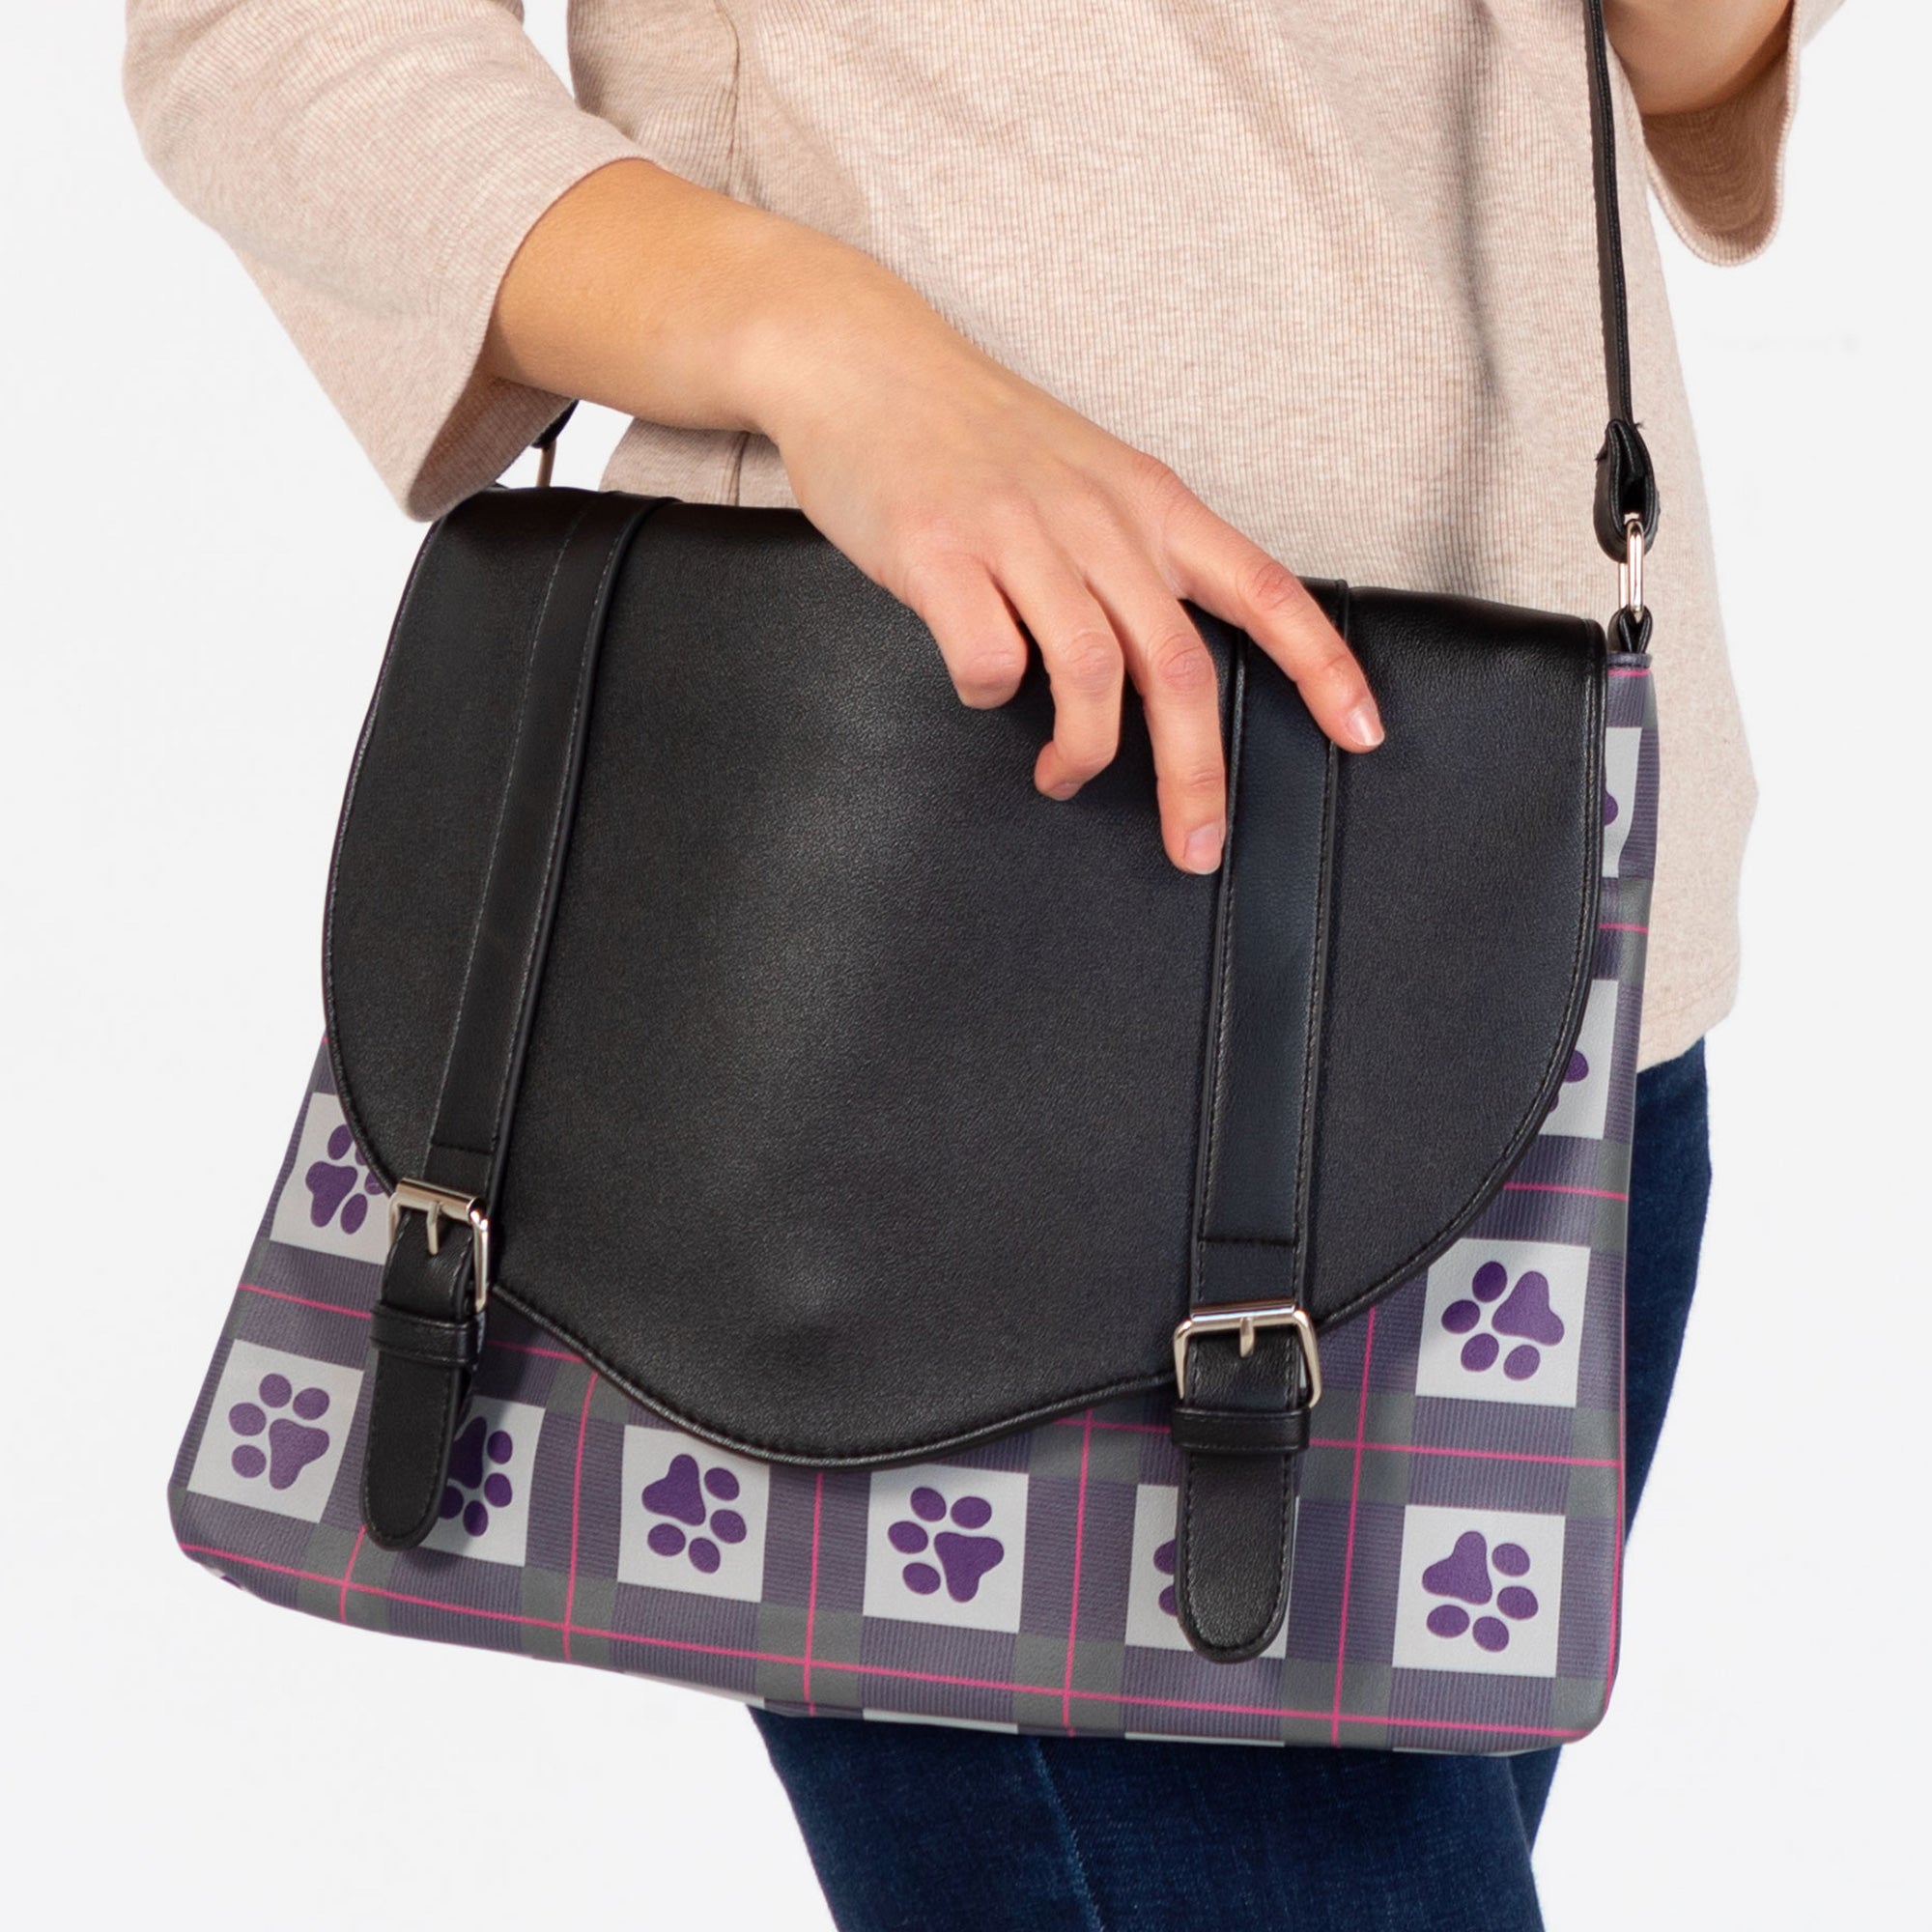 Colorful Paws Crossbody Purse - Checkerboard Paws